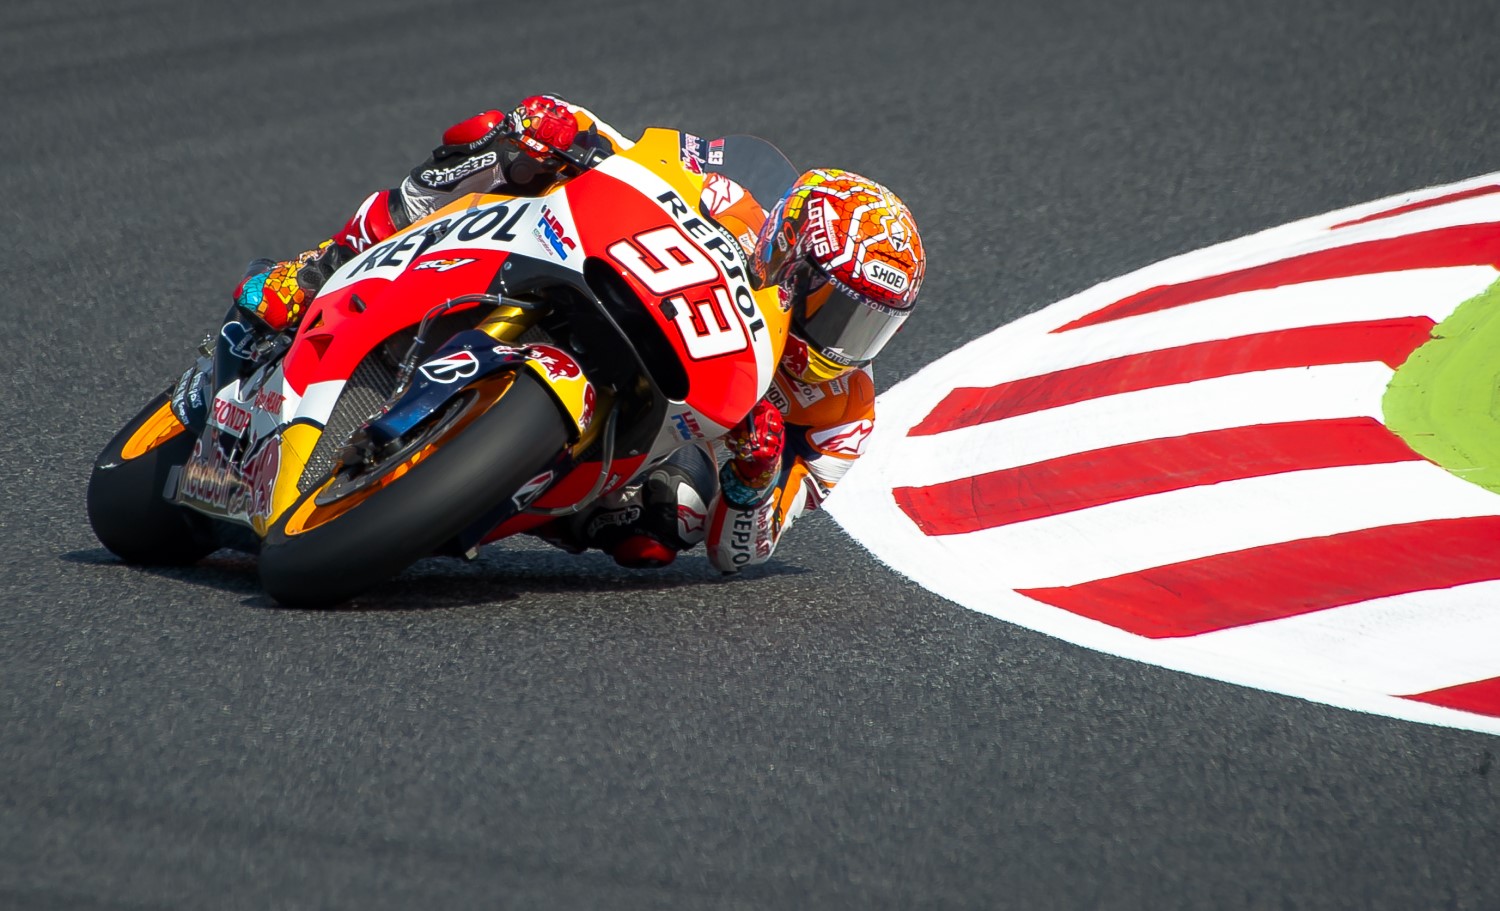 Animoca To Develop MotoGP Blockchain Game With Crypto Collectibles